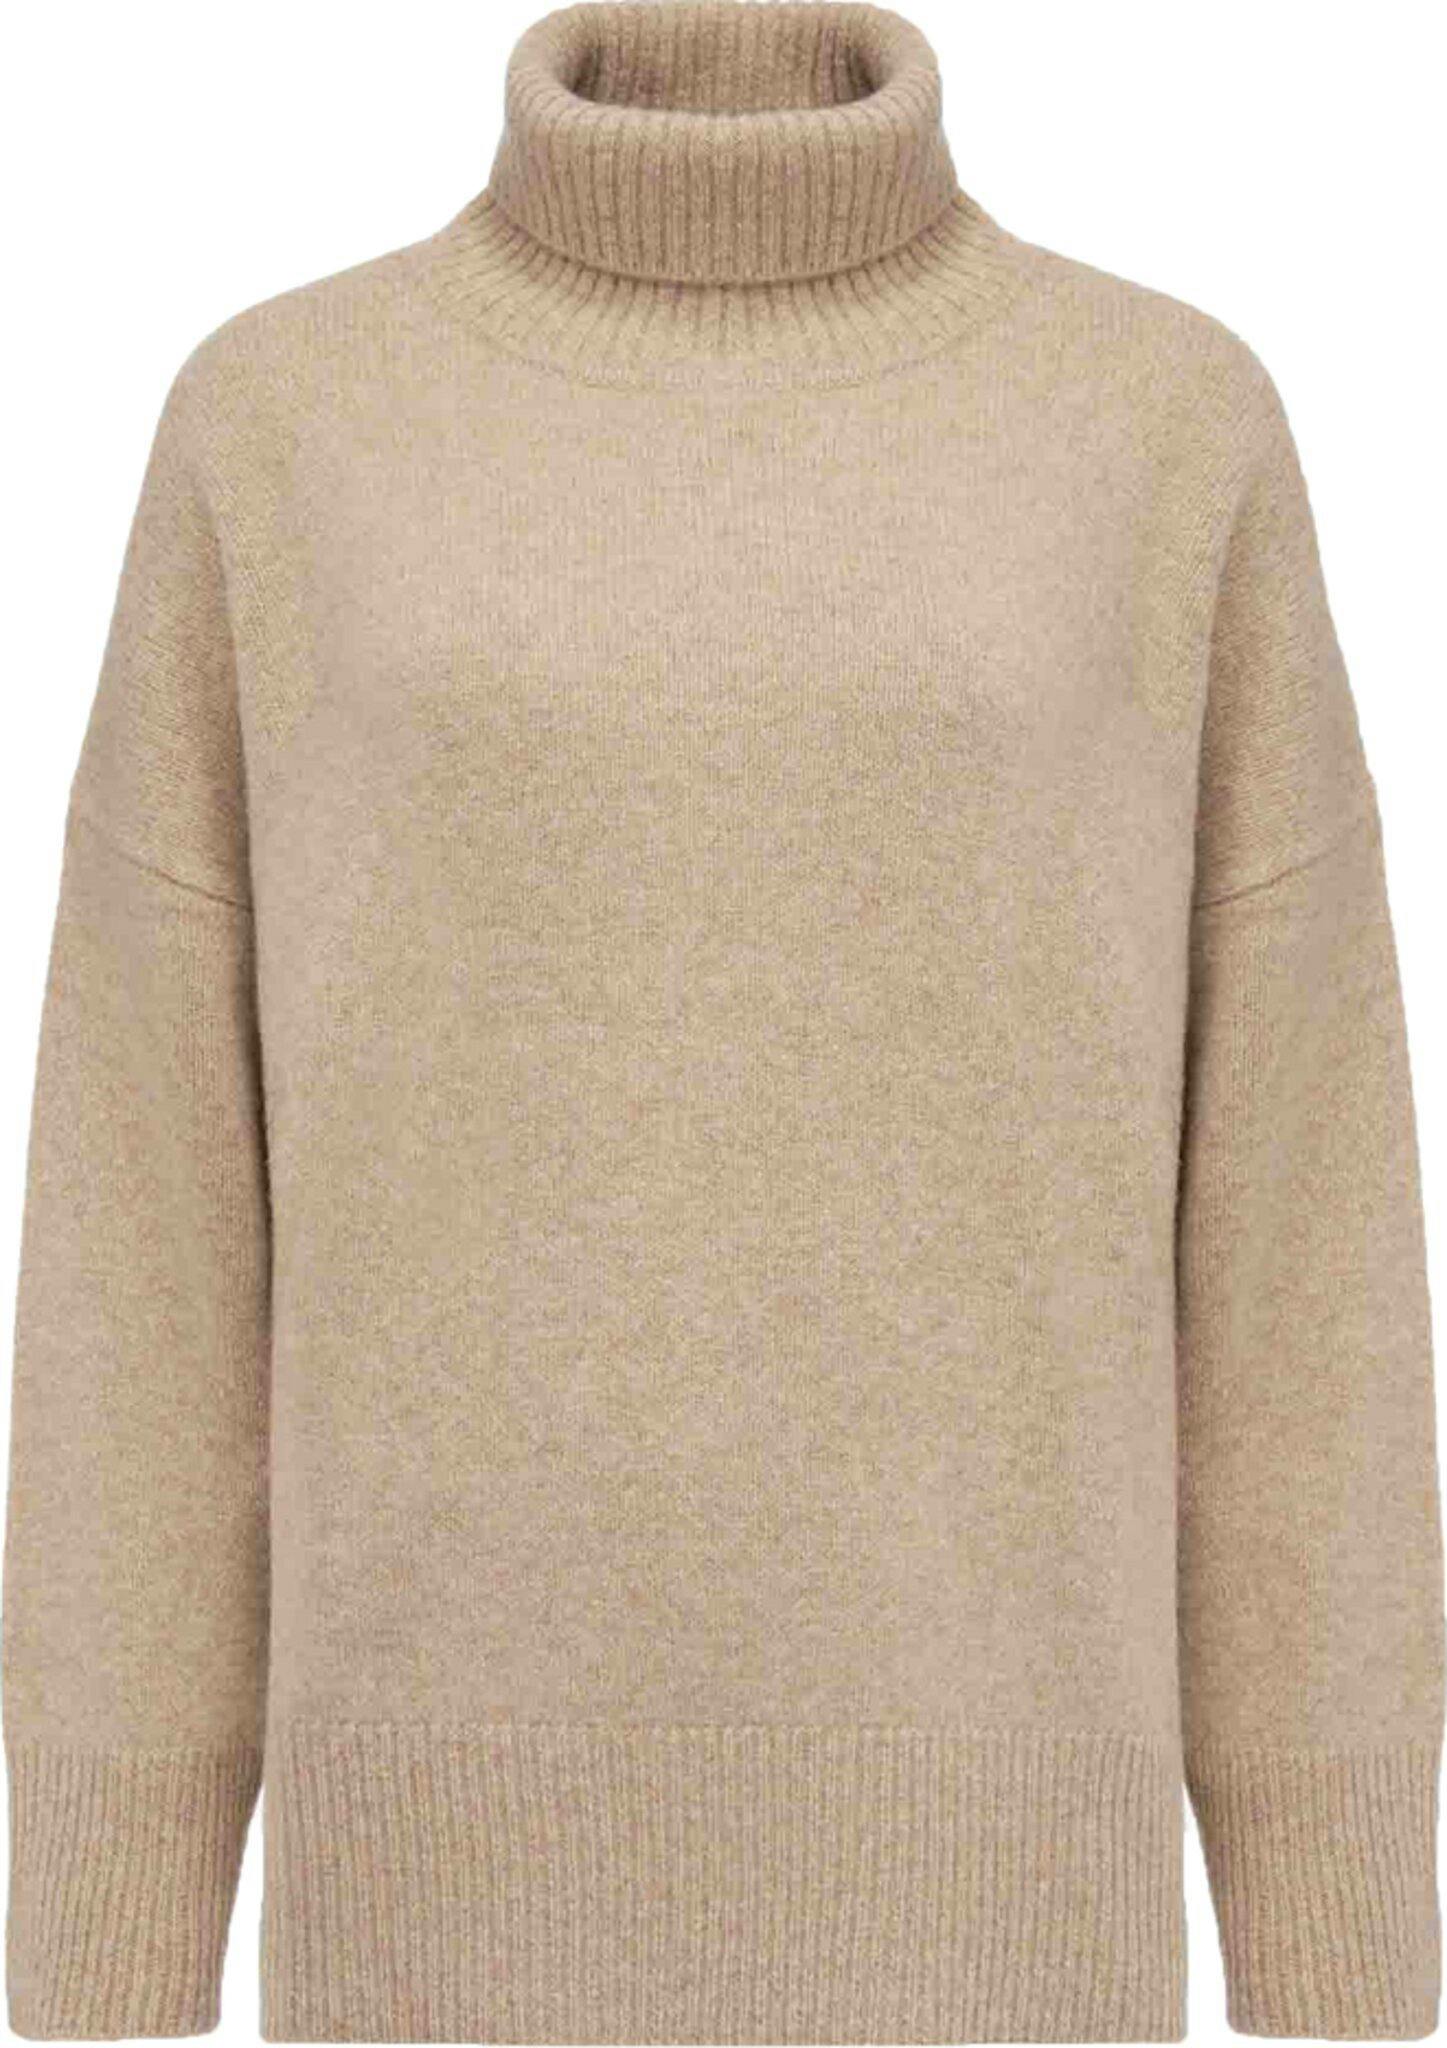 Product image for Blefjell Sweater - Women's